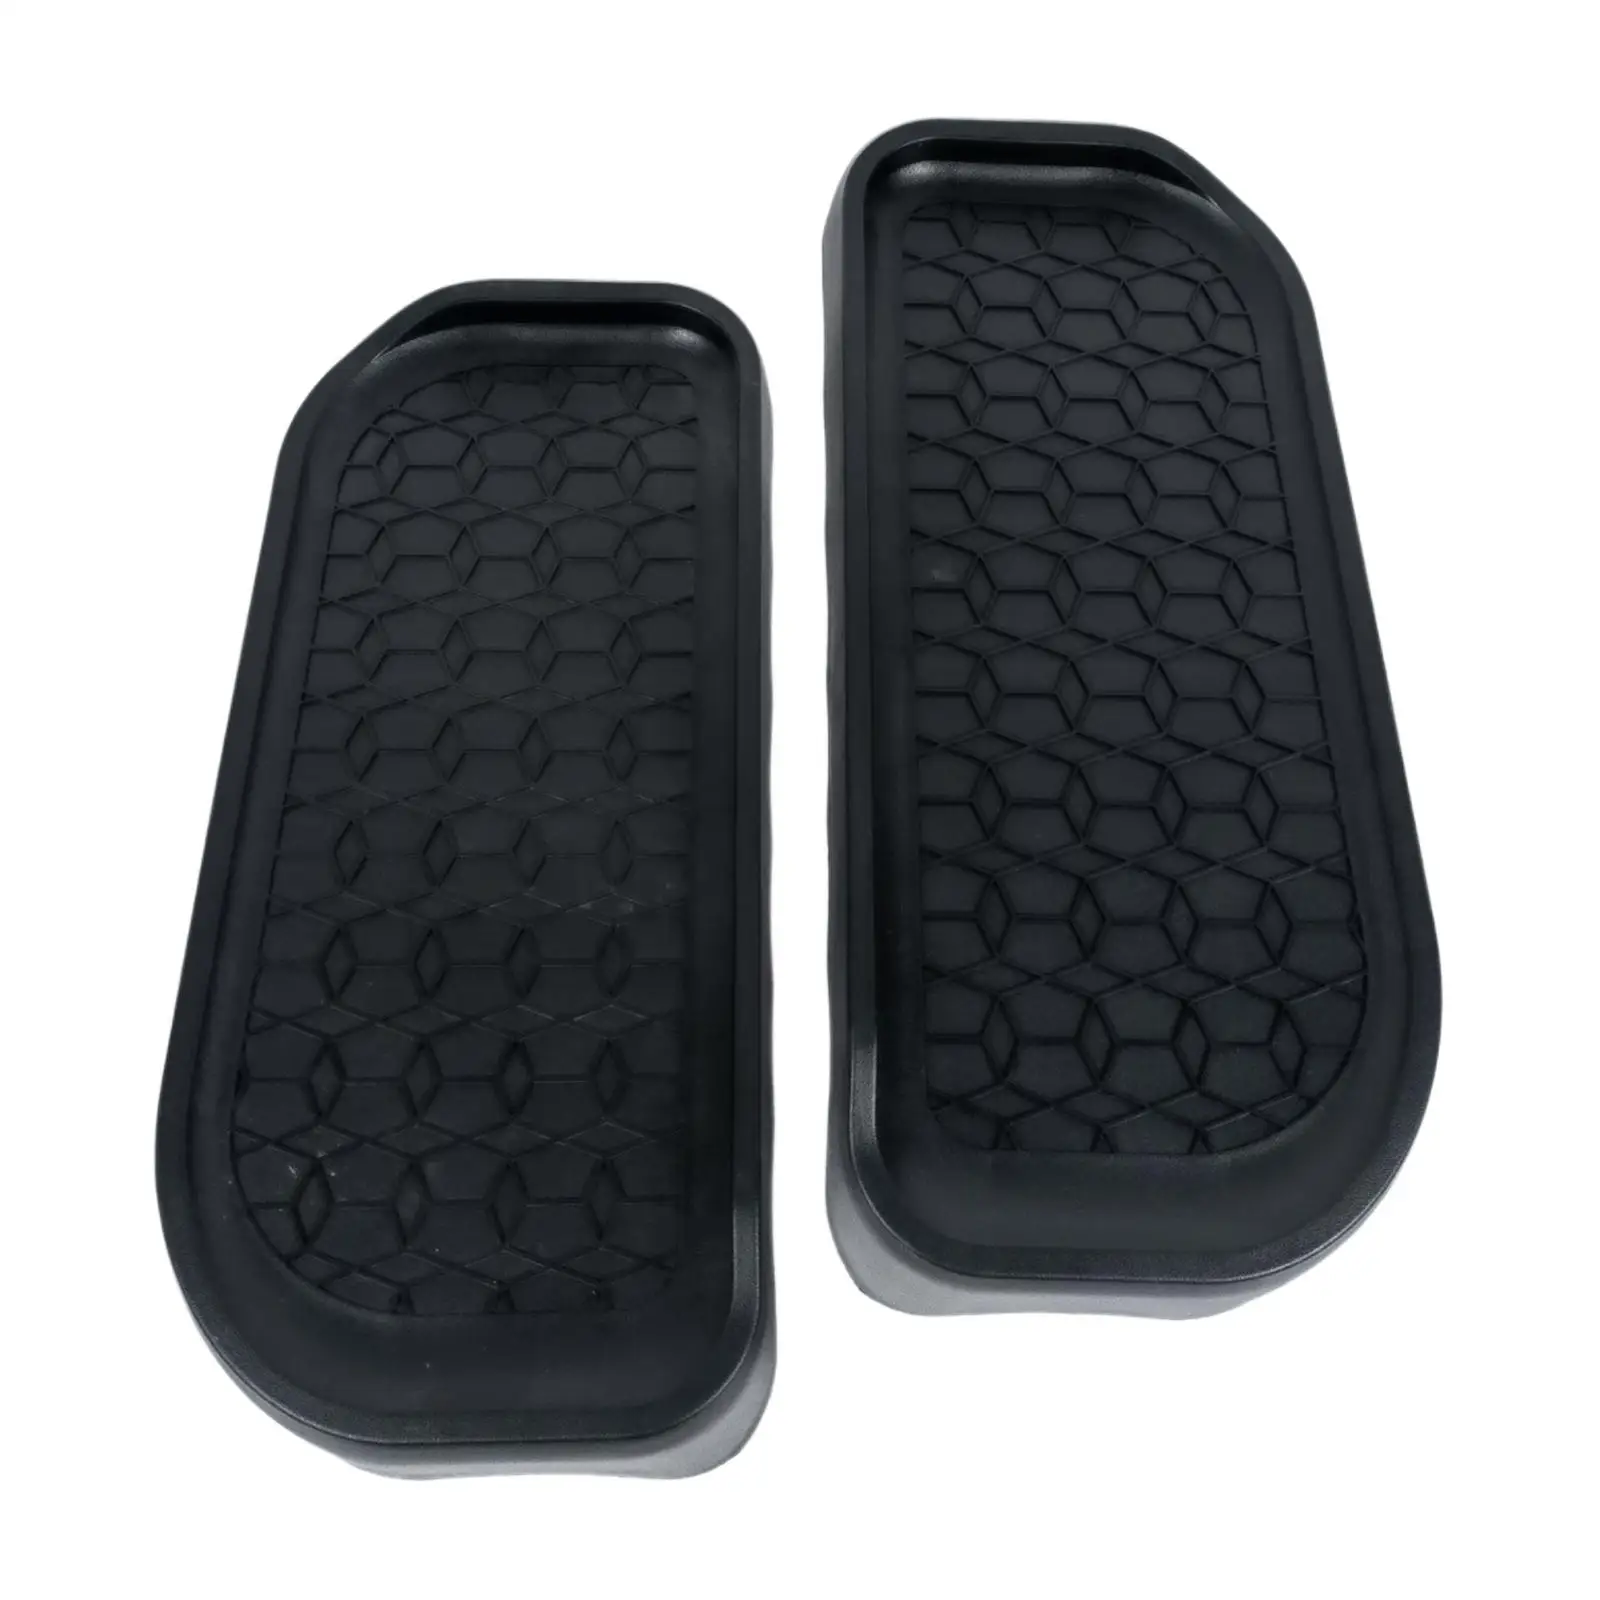 2Pcs Elliptical Machine Foot Pedals Leg Training Pedals Simple to Install Walking Machine Pedals for Exercise Indoor Supplies